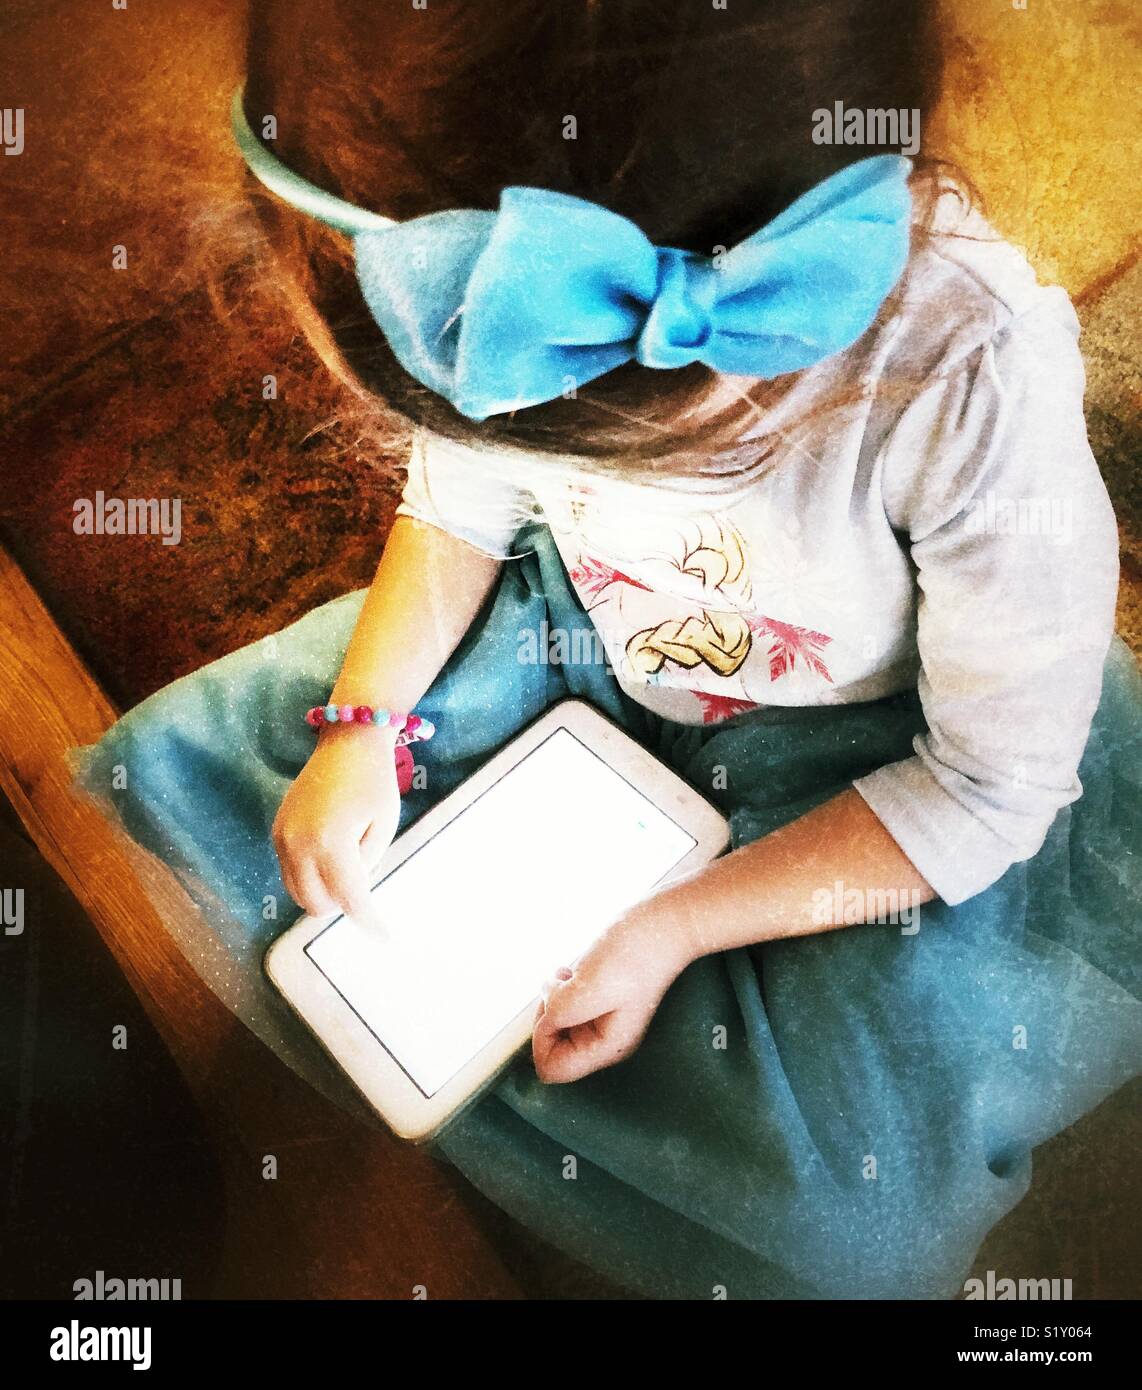 Young girl wearing blue dress and hair bow sitting cross legged on floor with a tablet Stock Photo